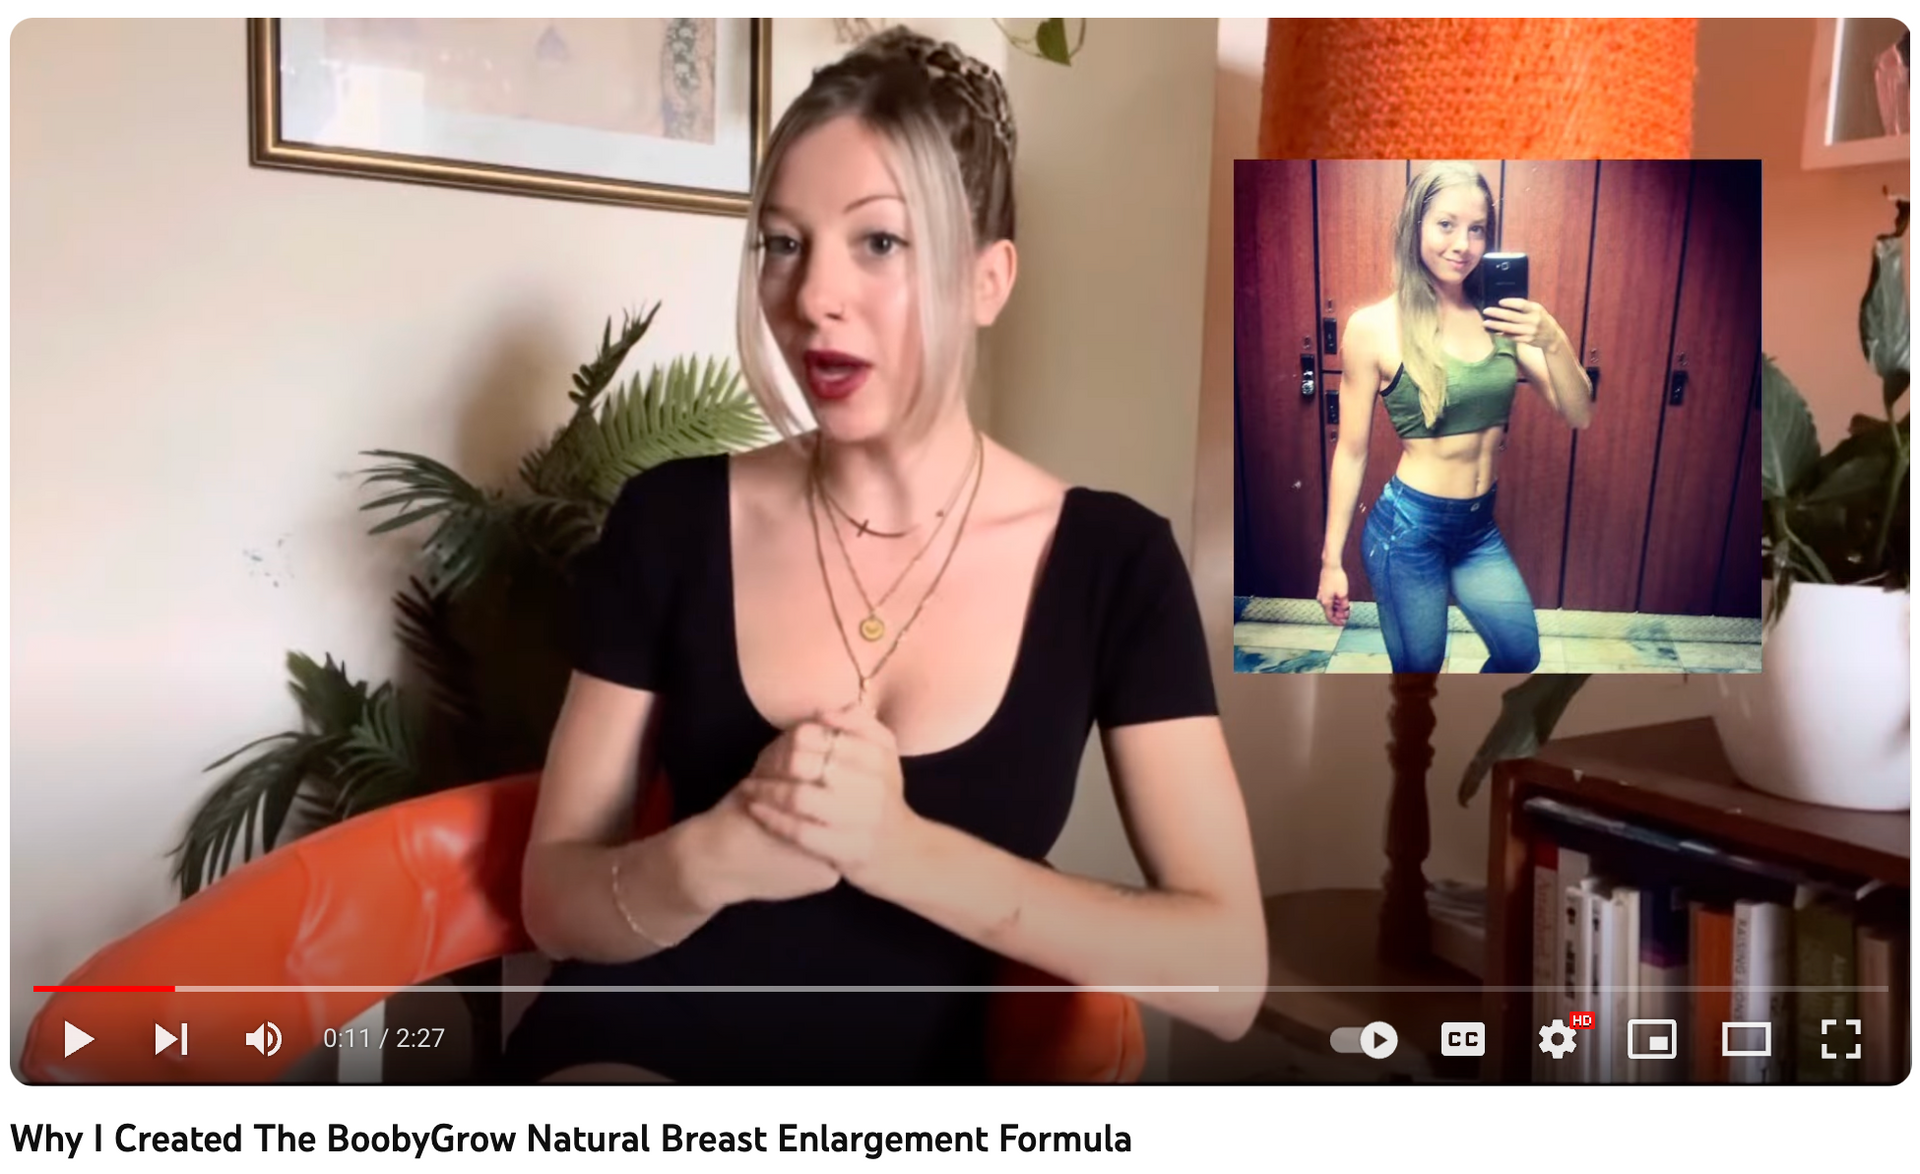 Load video: Why I Created The BoobyGrow Natural Breast Enlargment Formula